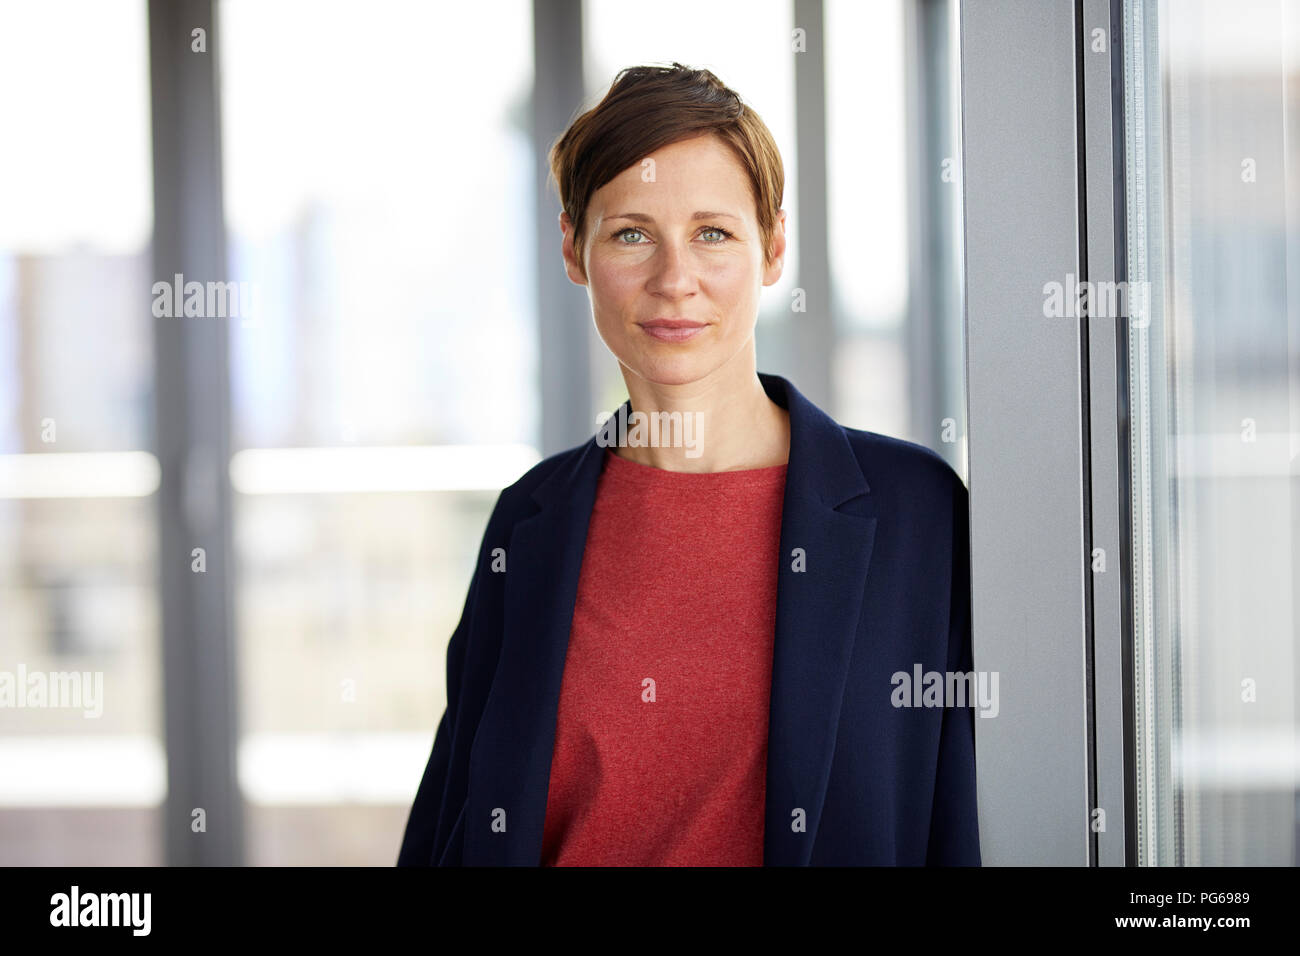 Portrait of smiling woman in office Stock Photo